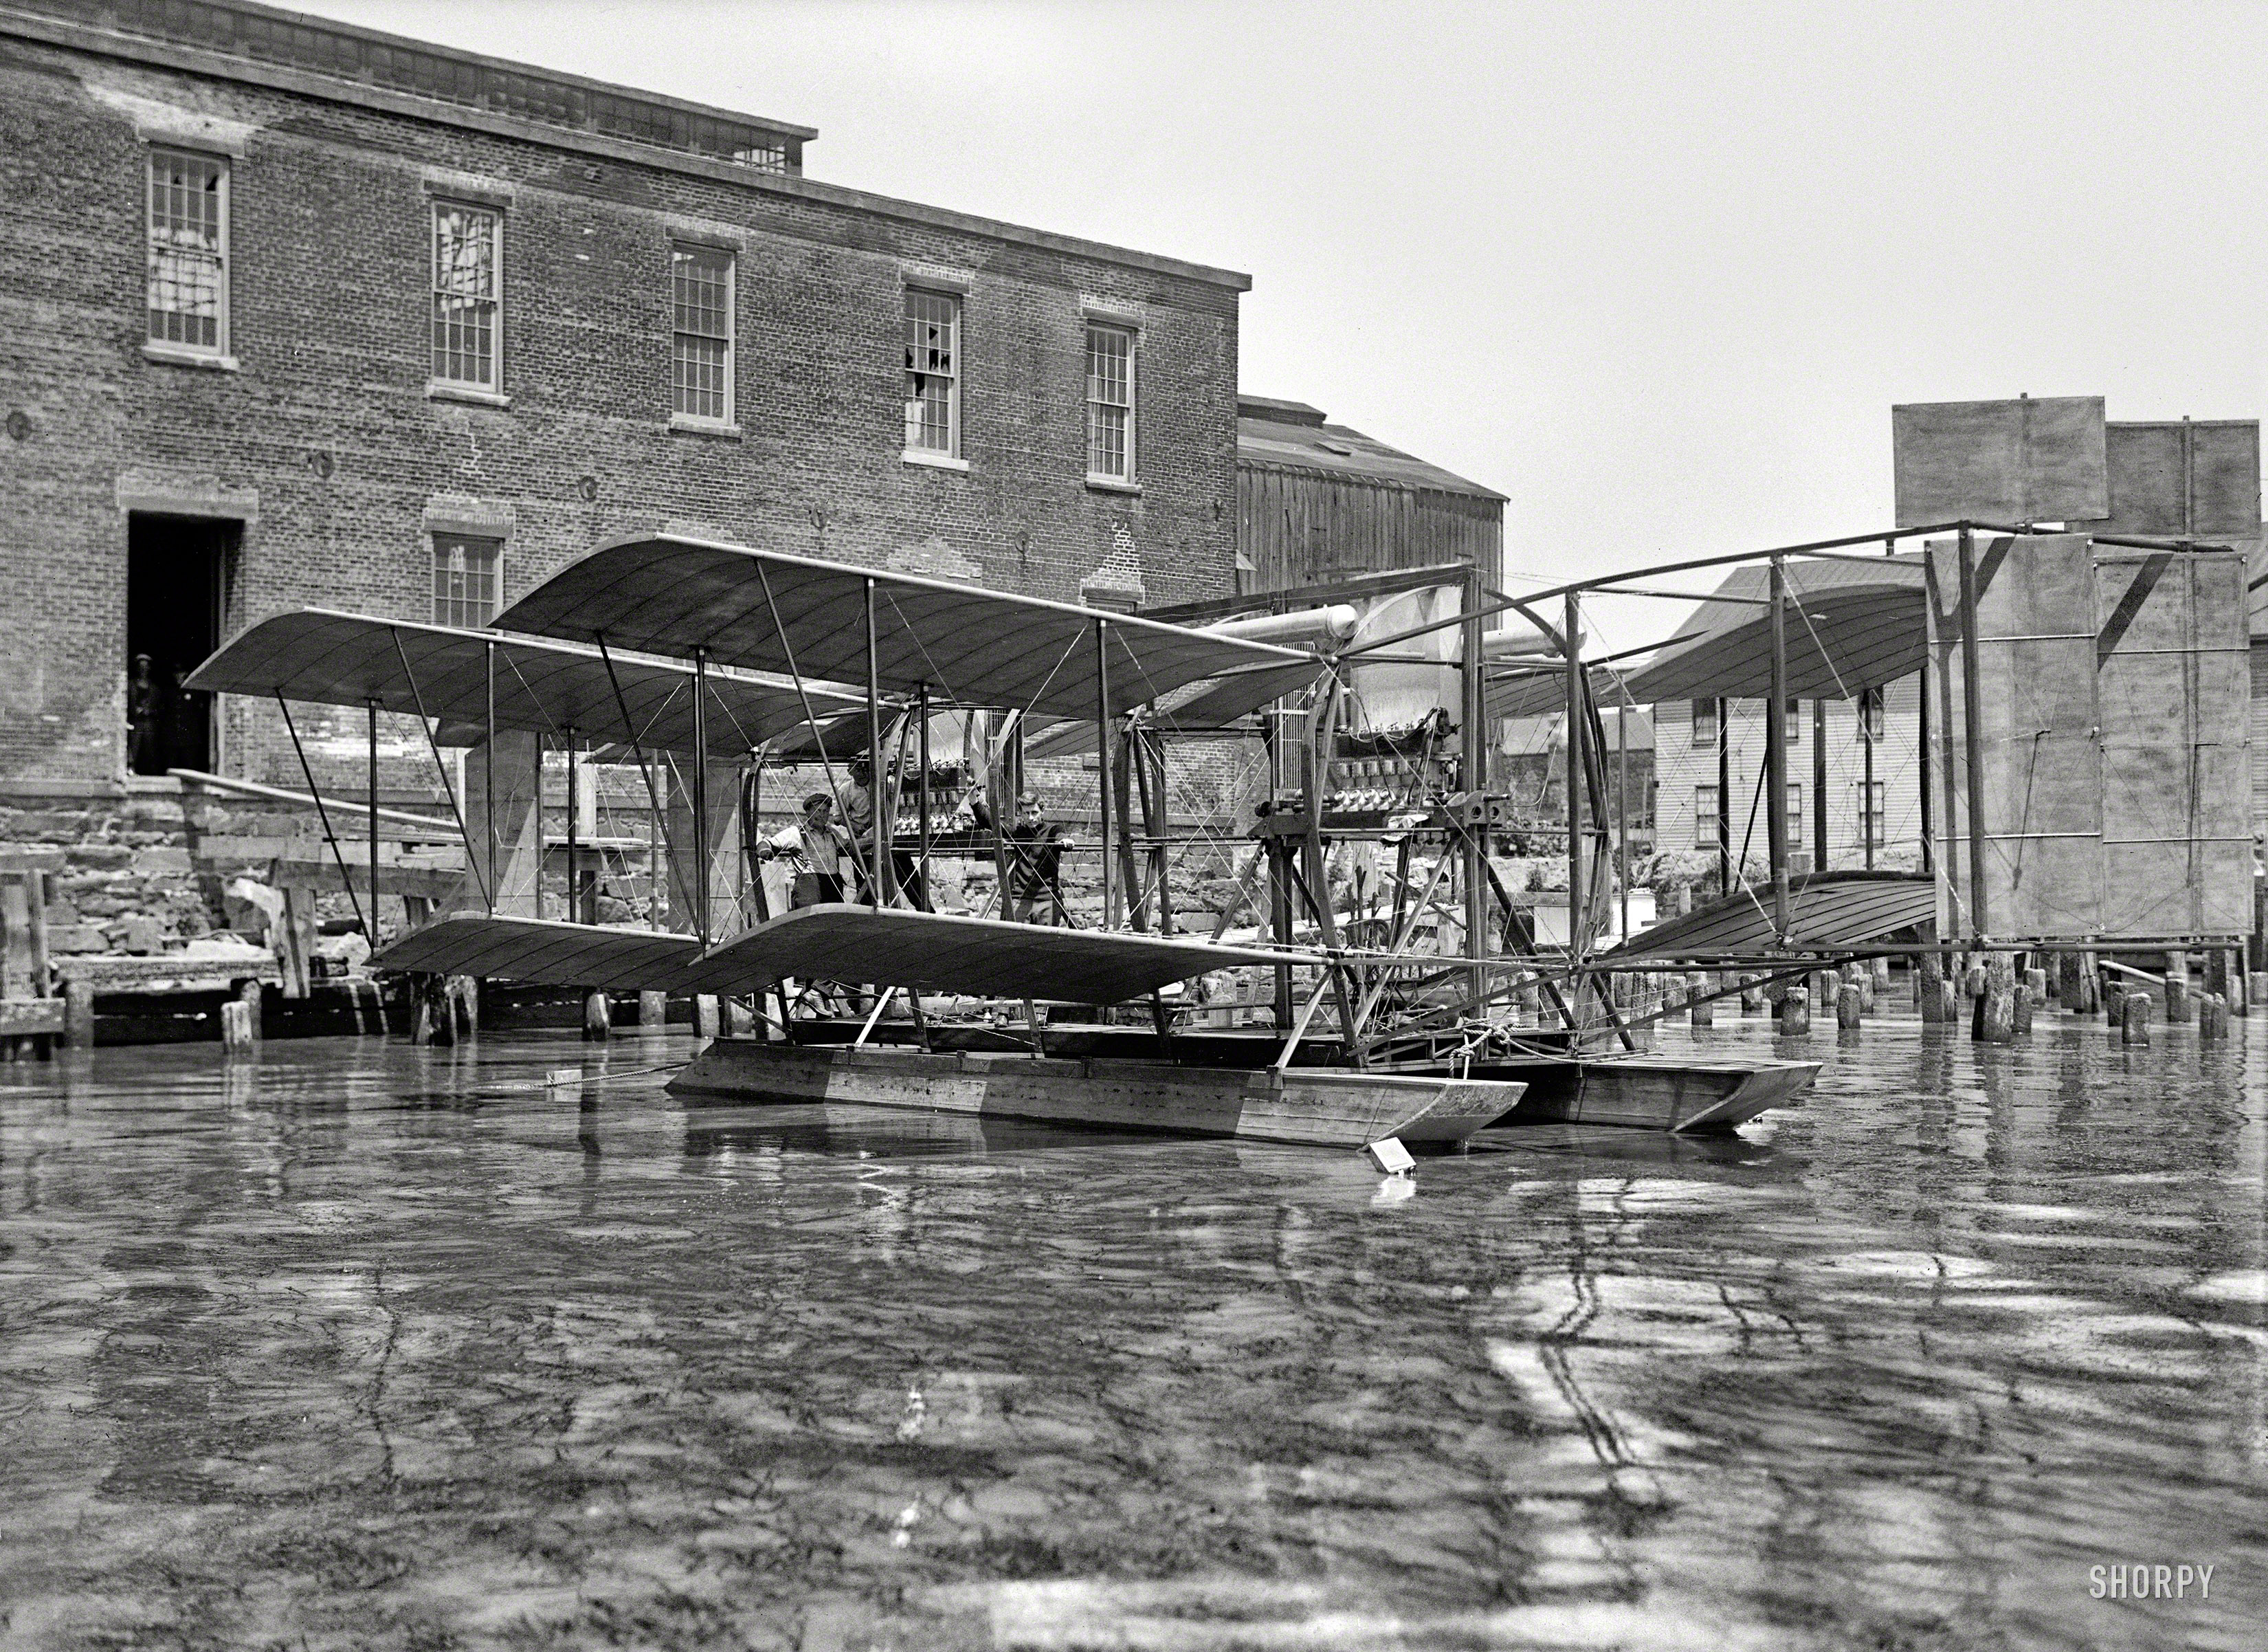 1917. "Langley, Samuel Pierpont. Secretary, Smithsonian Institute. Experimental tandem biplane on Potomac embodying Langley principles." Last seen here. Harris & Ewing Collection glass negative. View full size.